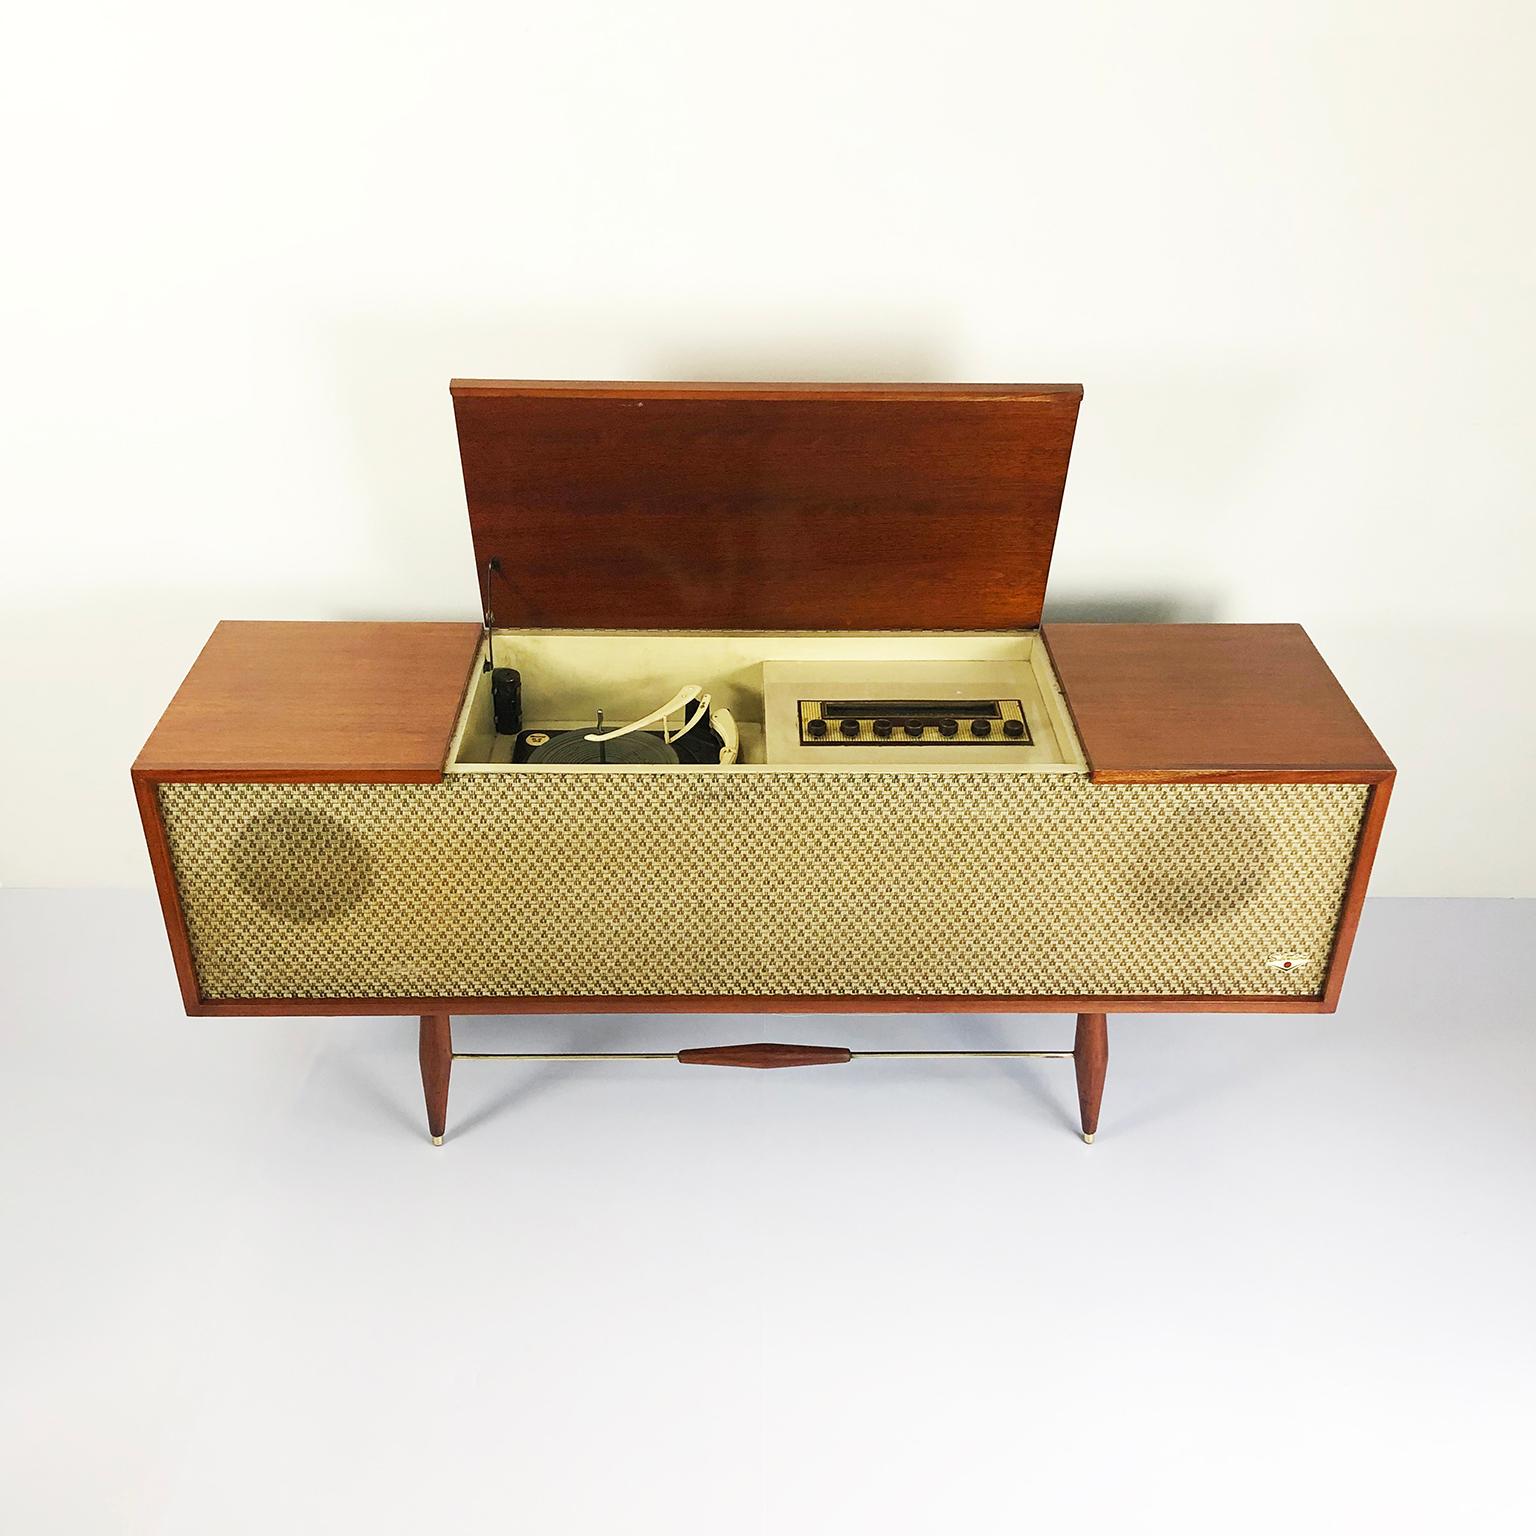 We offer this midcentury record player console in amazing vintage condition, the sound system works, circa 1950. Recently professionally restored.